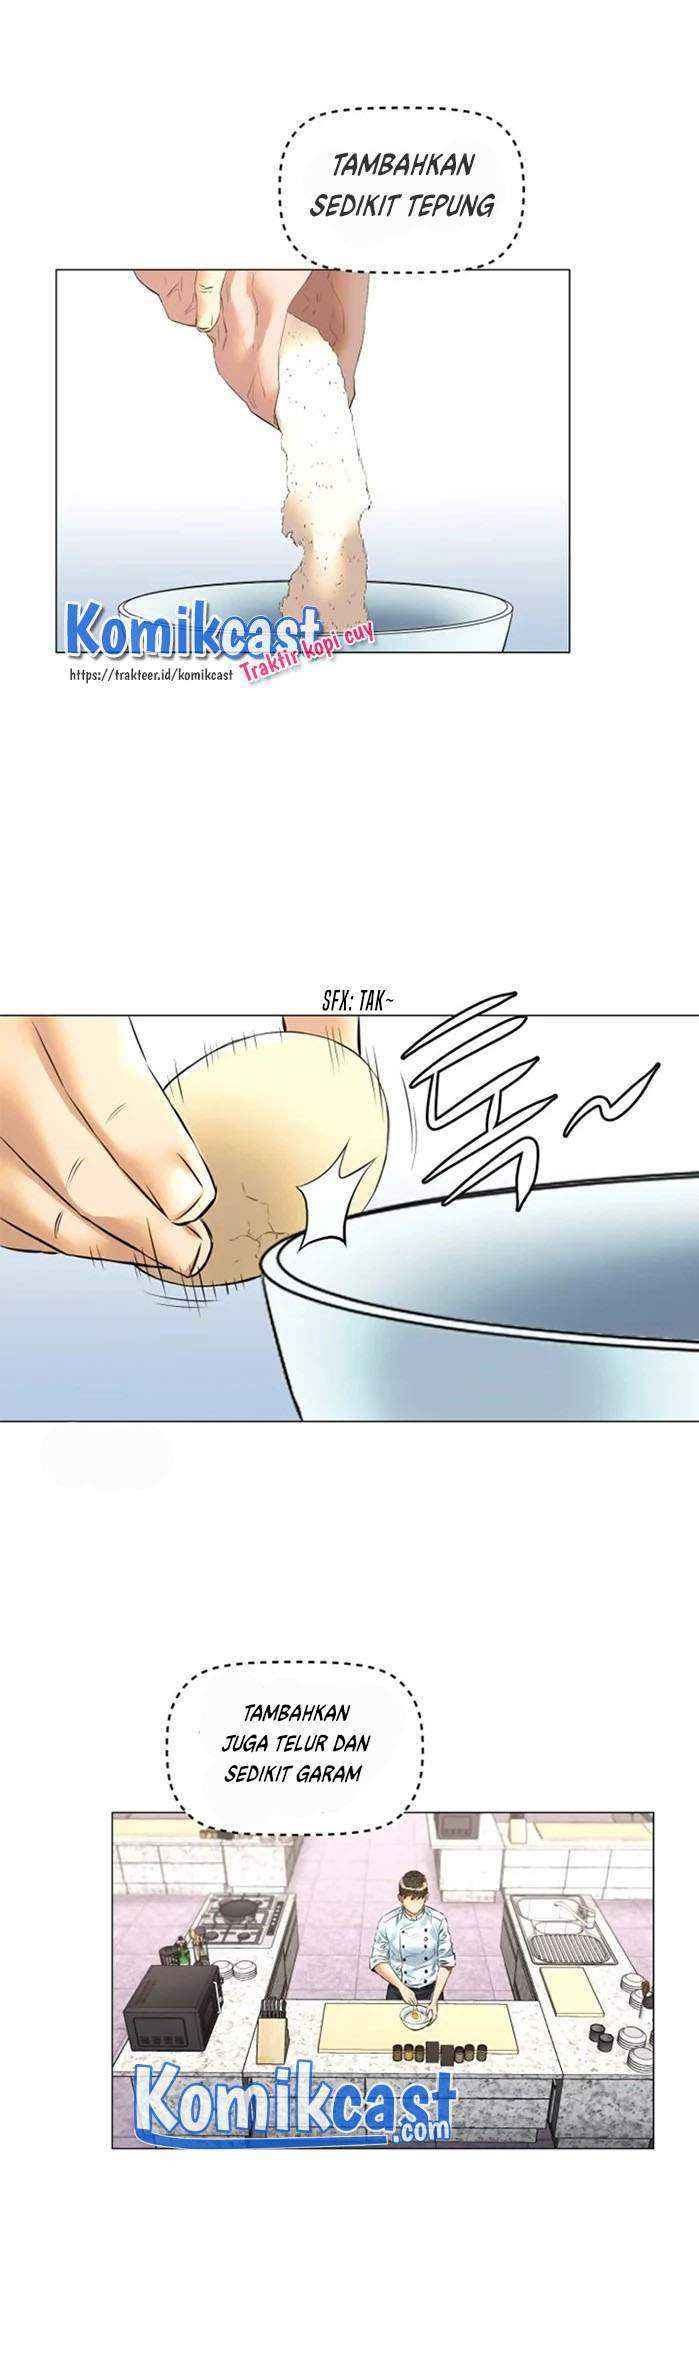 God of Cooking Chapter 36